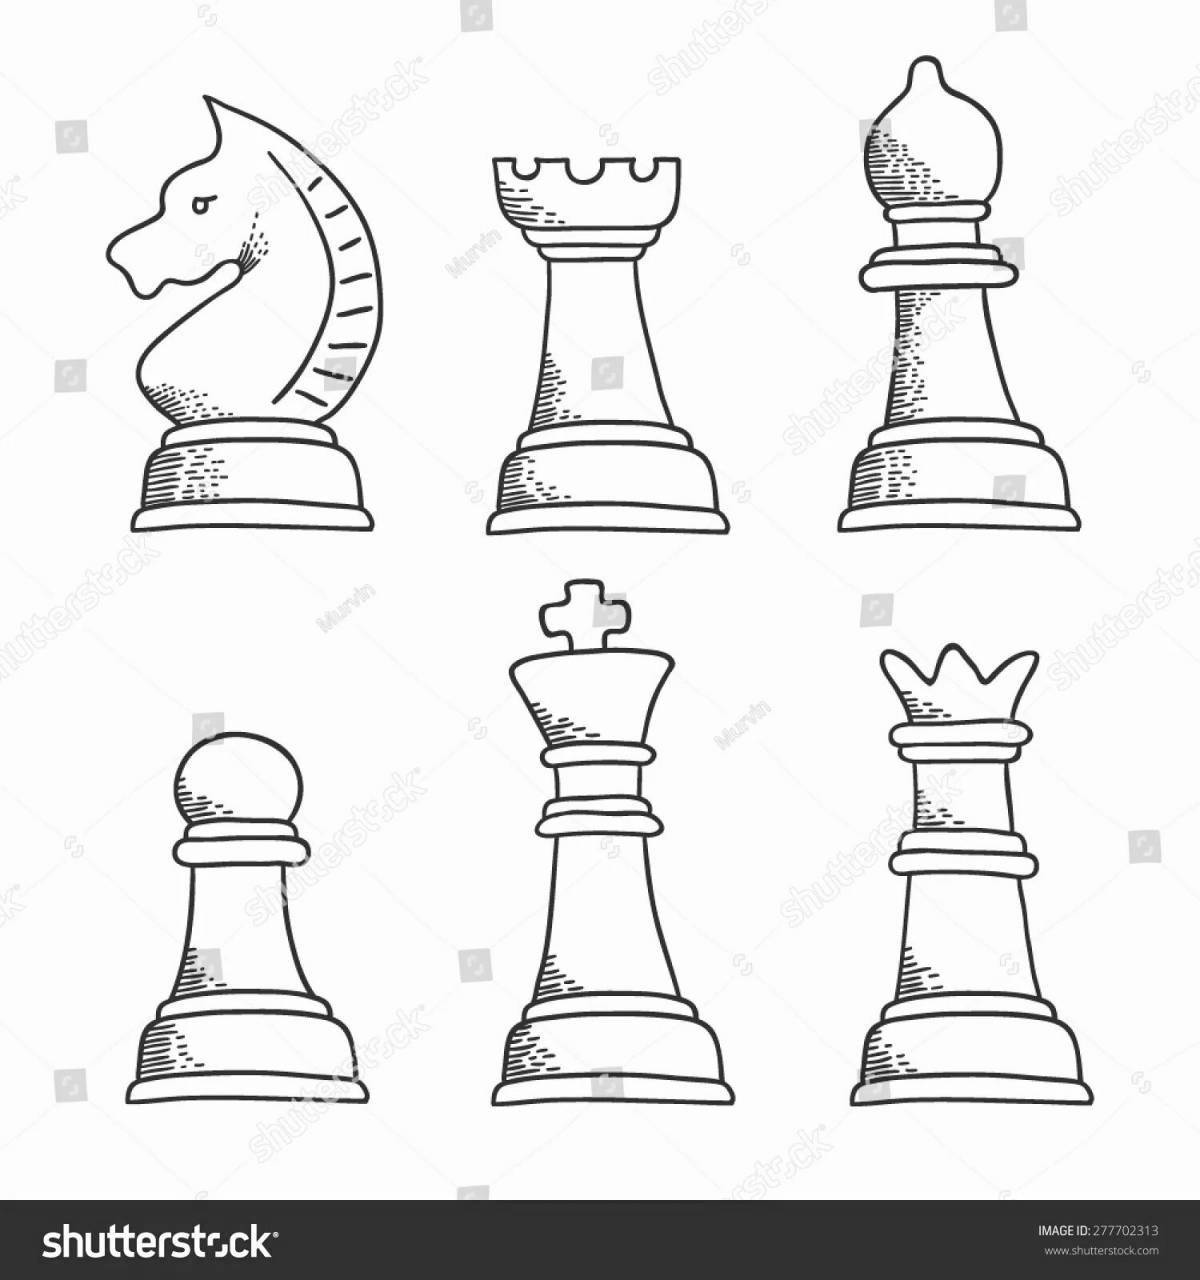 Dazzling chess pieces coloring book